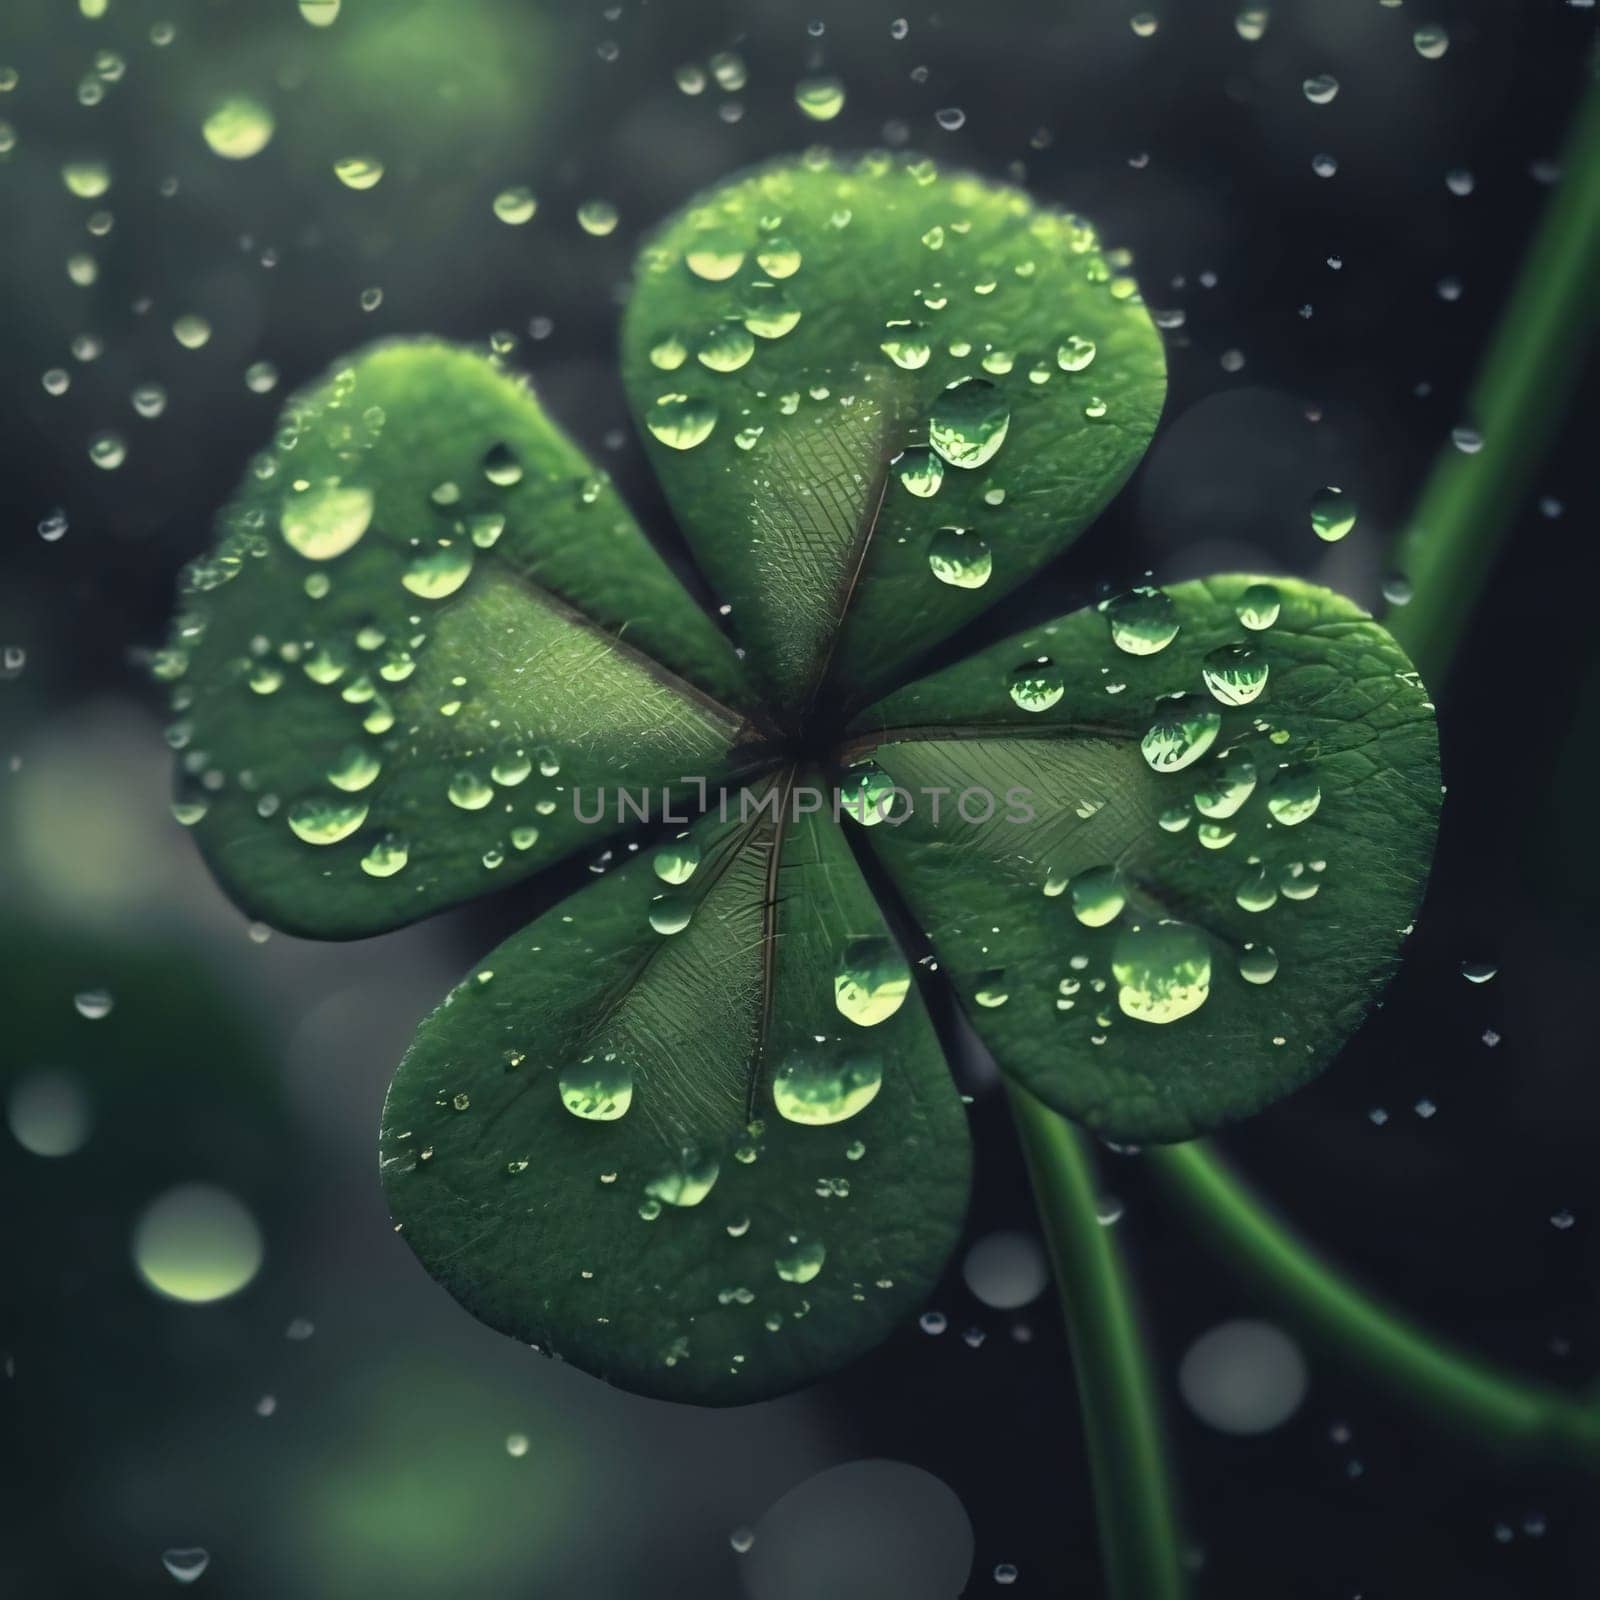 Four-leaf green clover with raindrops, dew on dark background. Green four-leaf clover symbol of St. Patrick's Day. A joyous time of celebration in the green color.